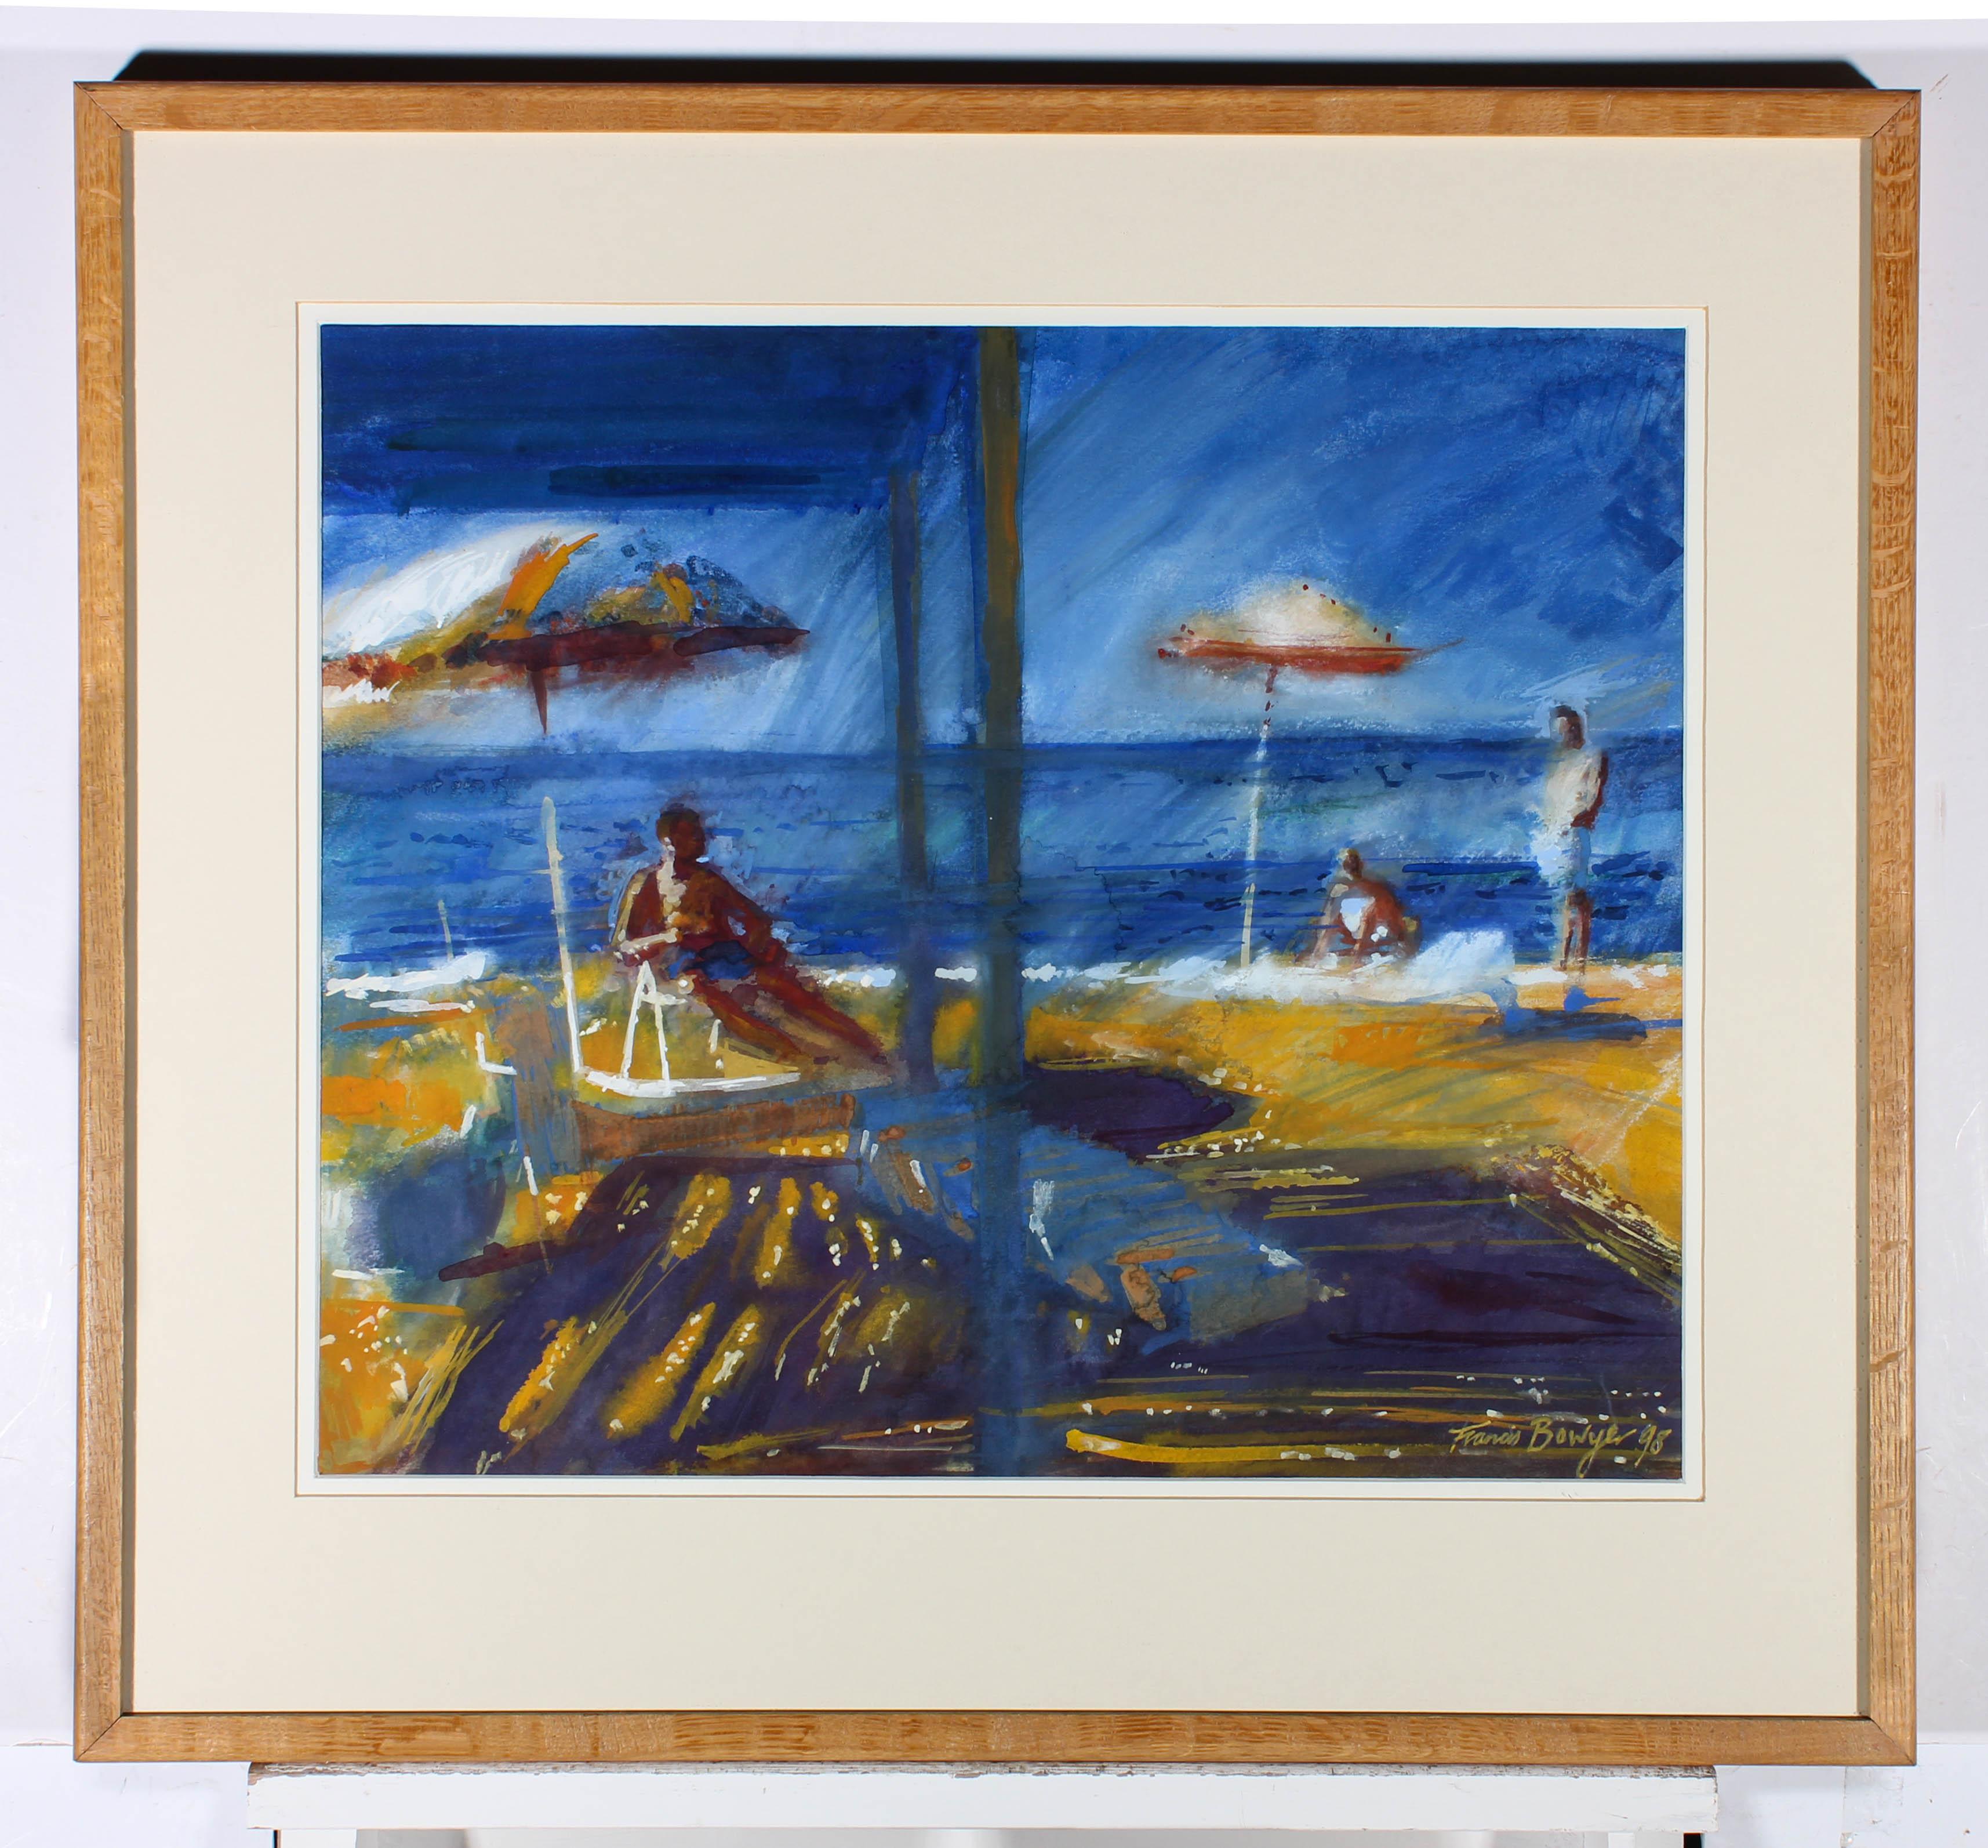 A fun and vibrant watercolour scene depicting figures lounging in deck chairs under umbrellas at the beach. Signed, titled and dated to the lower right. Presented in a glazed wooden frame. On paper.